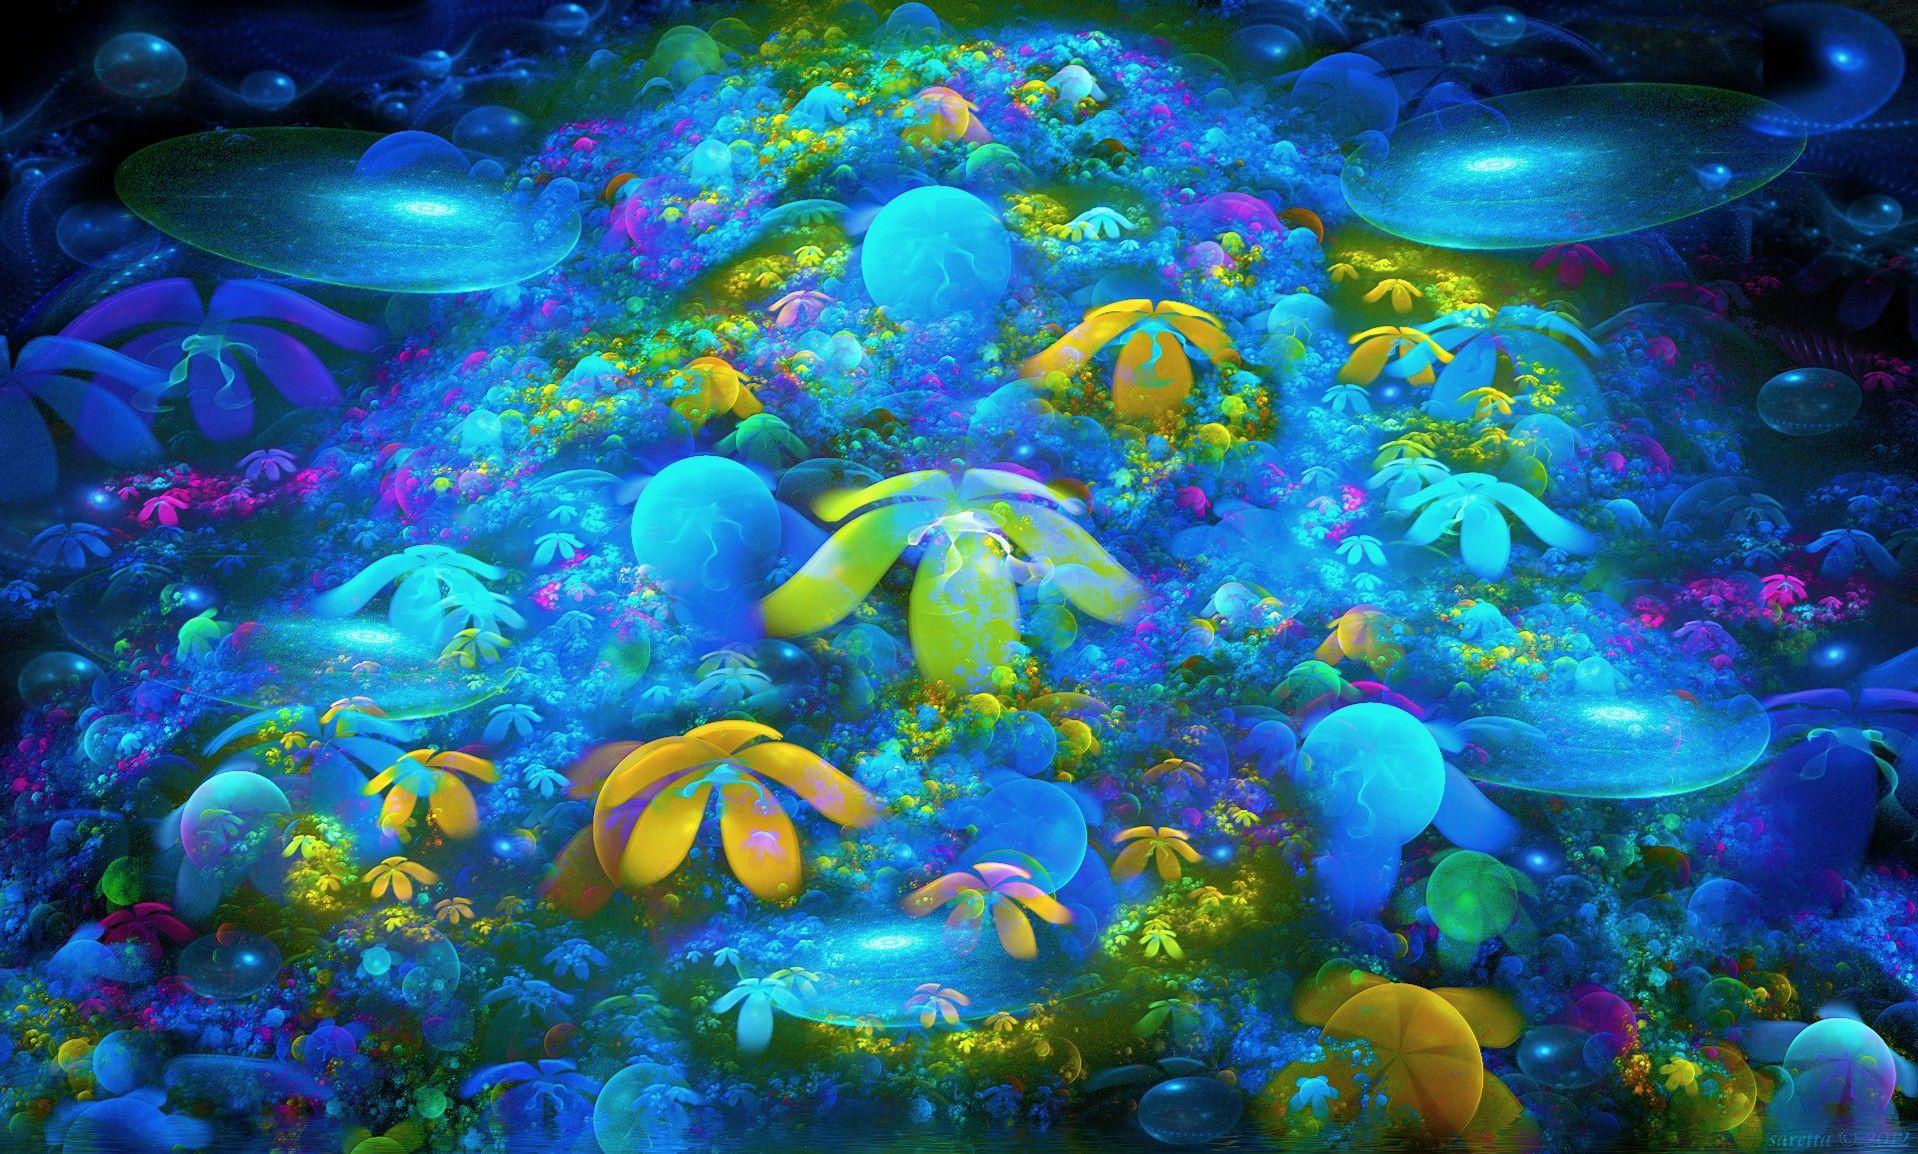 Abstract coral reef wallpaper. PC